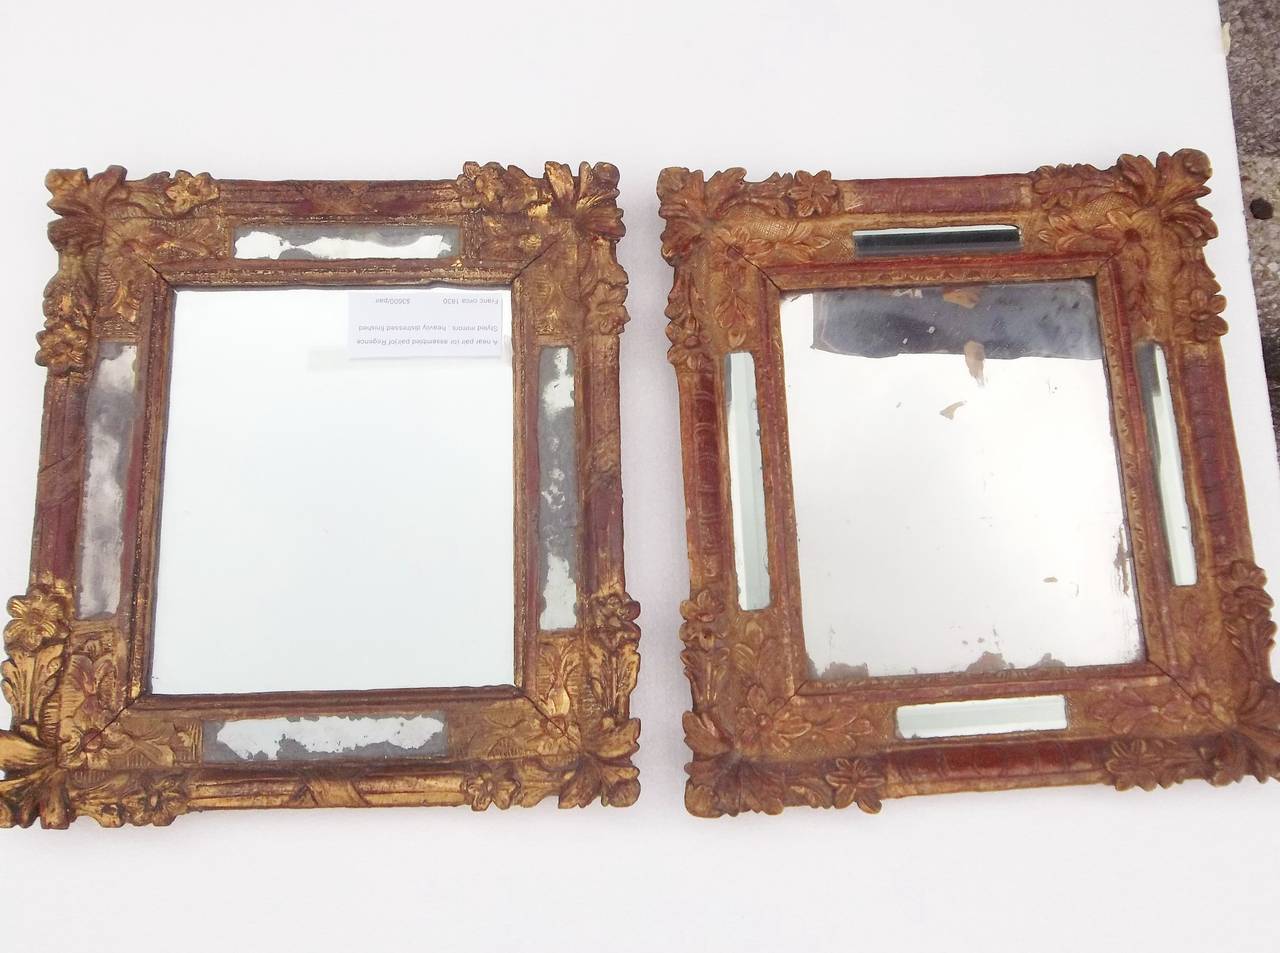 Pair of mid-19th century mirrors with repairs restorations, attractive distress.
Nearly identical size and pattern to frames 

One mirror with 4 beveled mirror flanking styles.  Red bole prominent color.

One mirror with 4 styles (and central